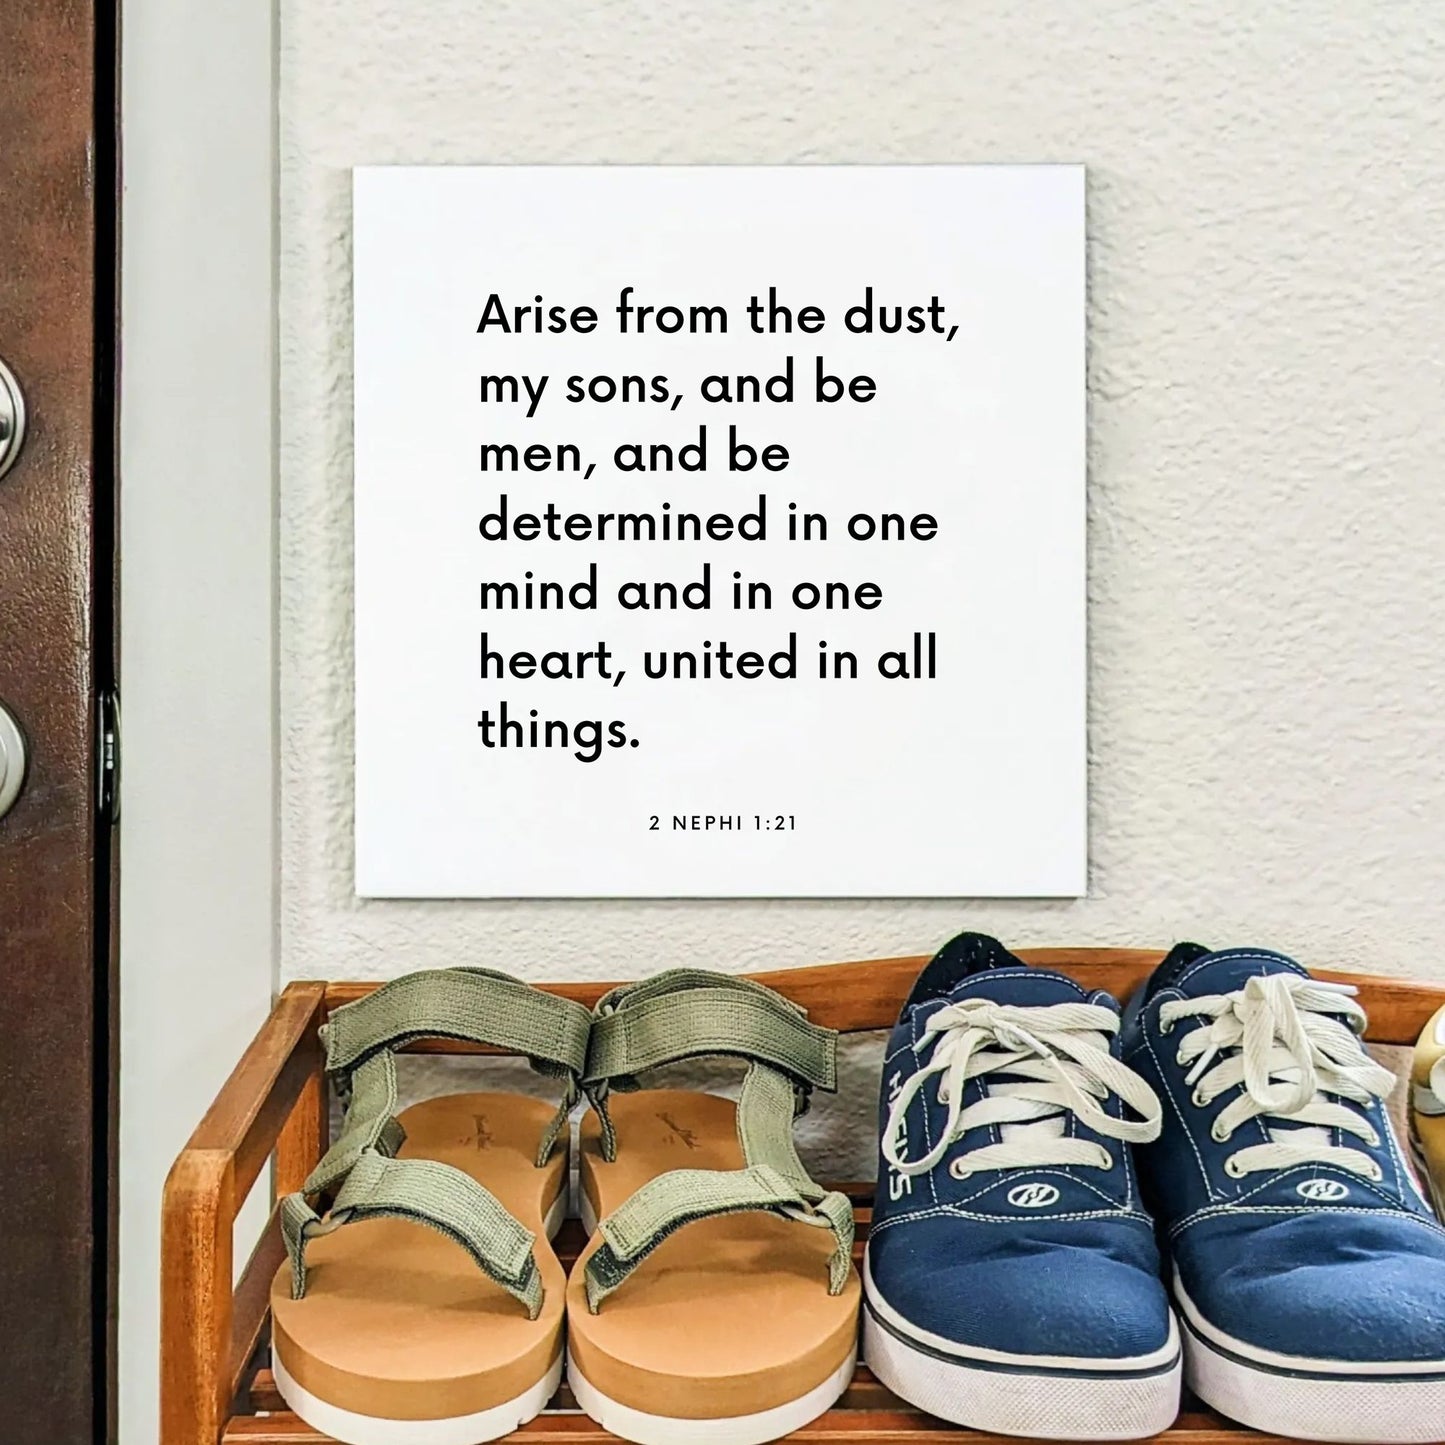 Shoes mouting of the scripture tile for 2 Nephi 1:21 - "Arise from the dust, my sons, and be men"